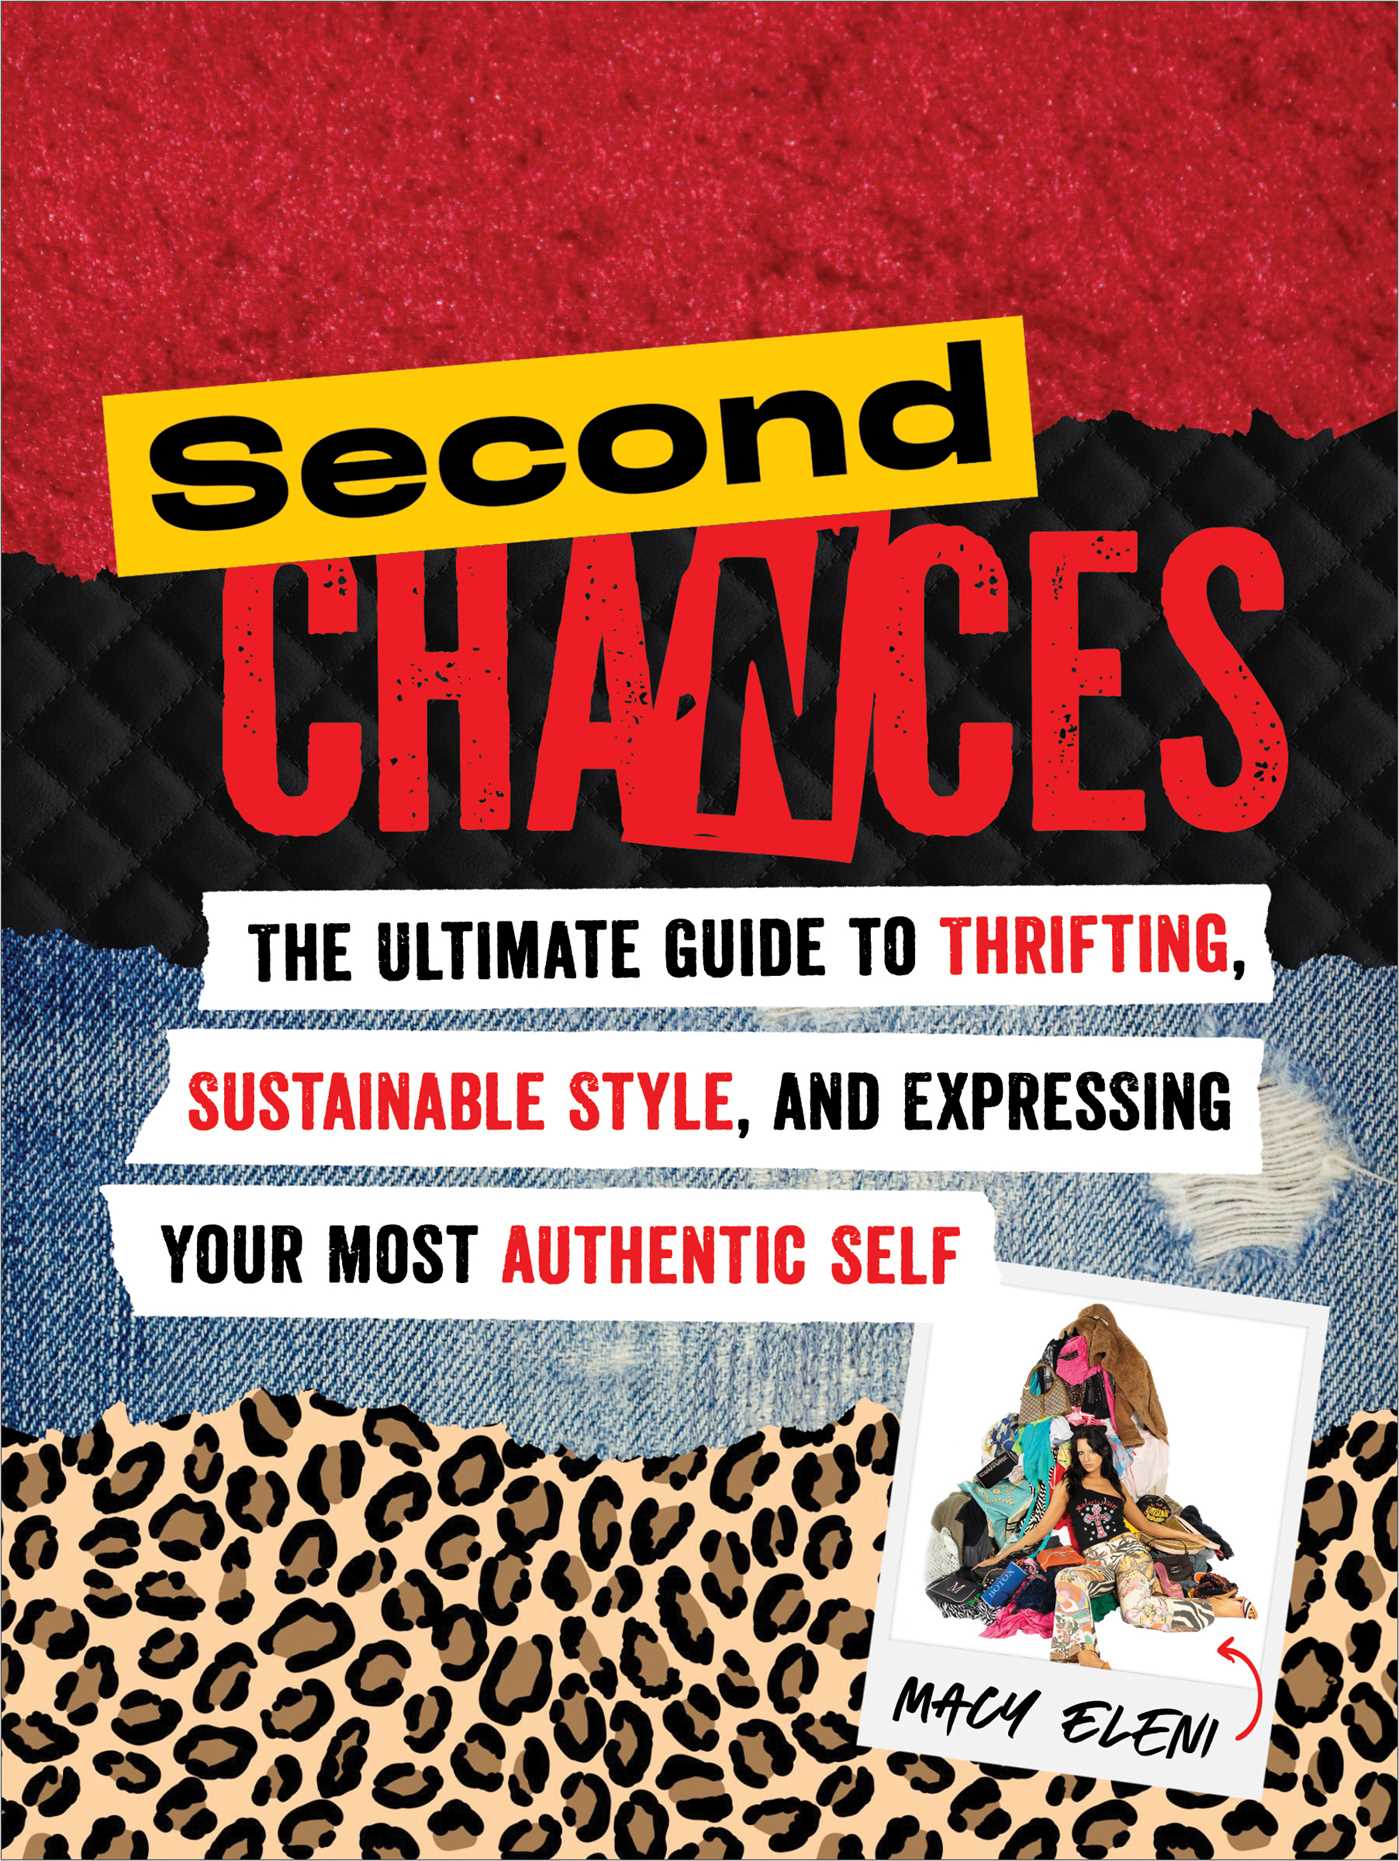 SECOND CHANCES - THE ULTIMATE GUIDE TO THRIFTING , SUSTAINABLE STYLE AND EXPRESSING YOUR MOST AUTHENTIC SELF, by ELENI , MACY